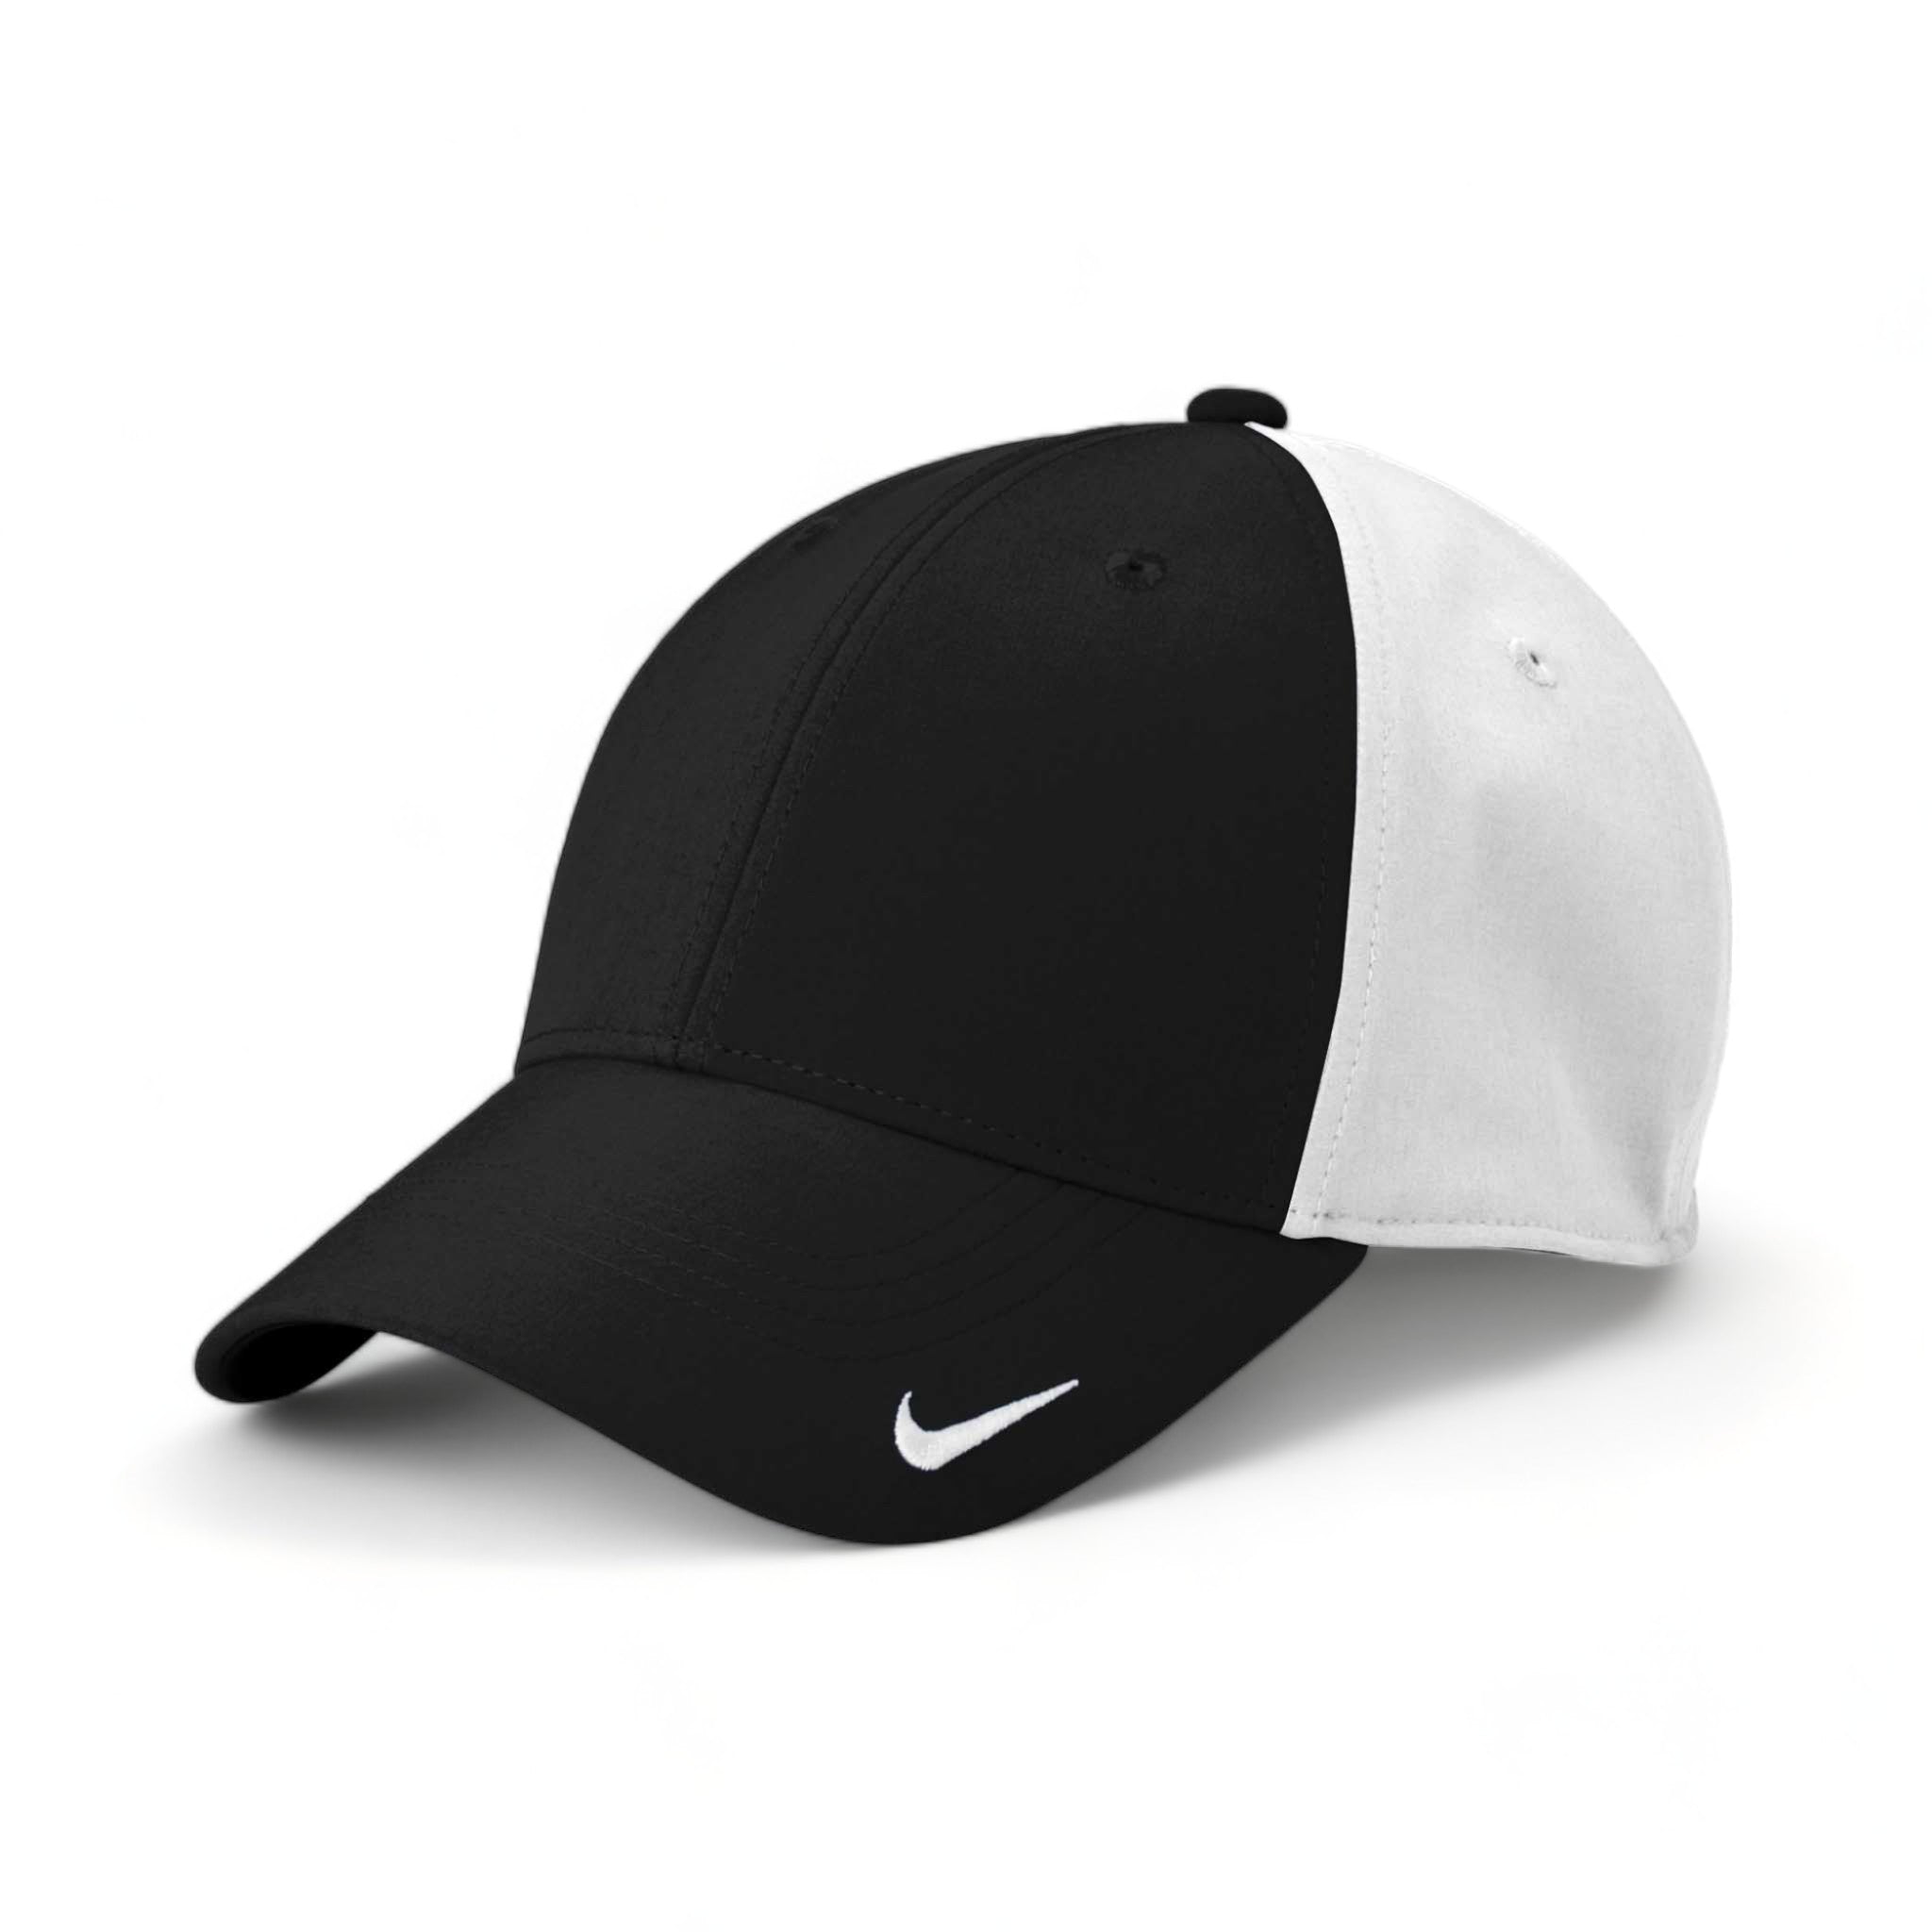 Side view of Nike NKFB6447 custom hat in black and white